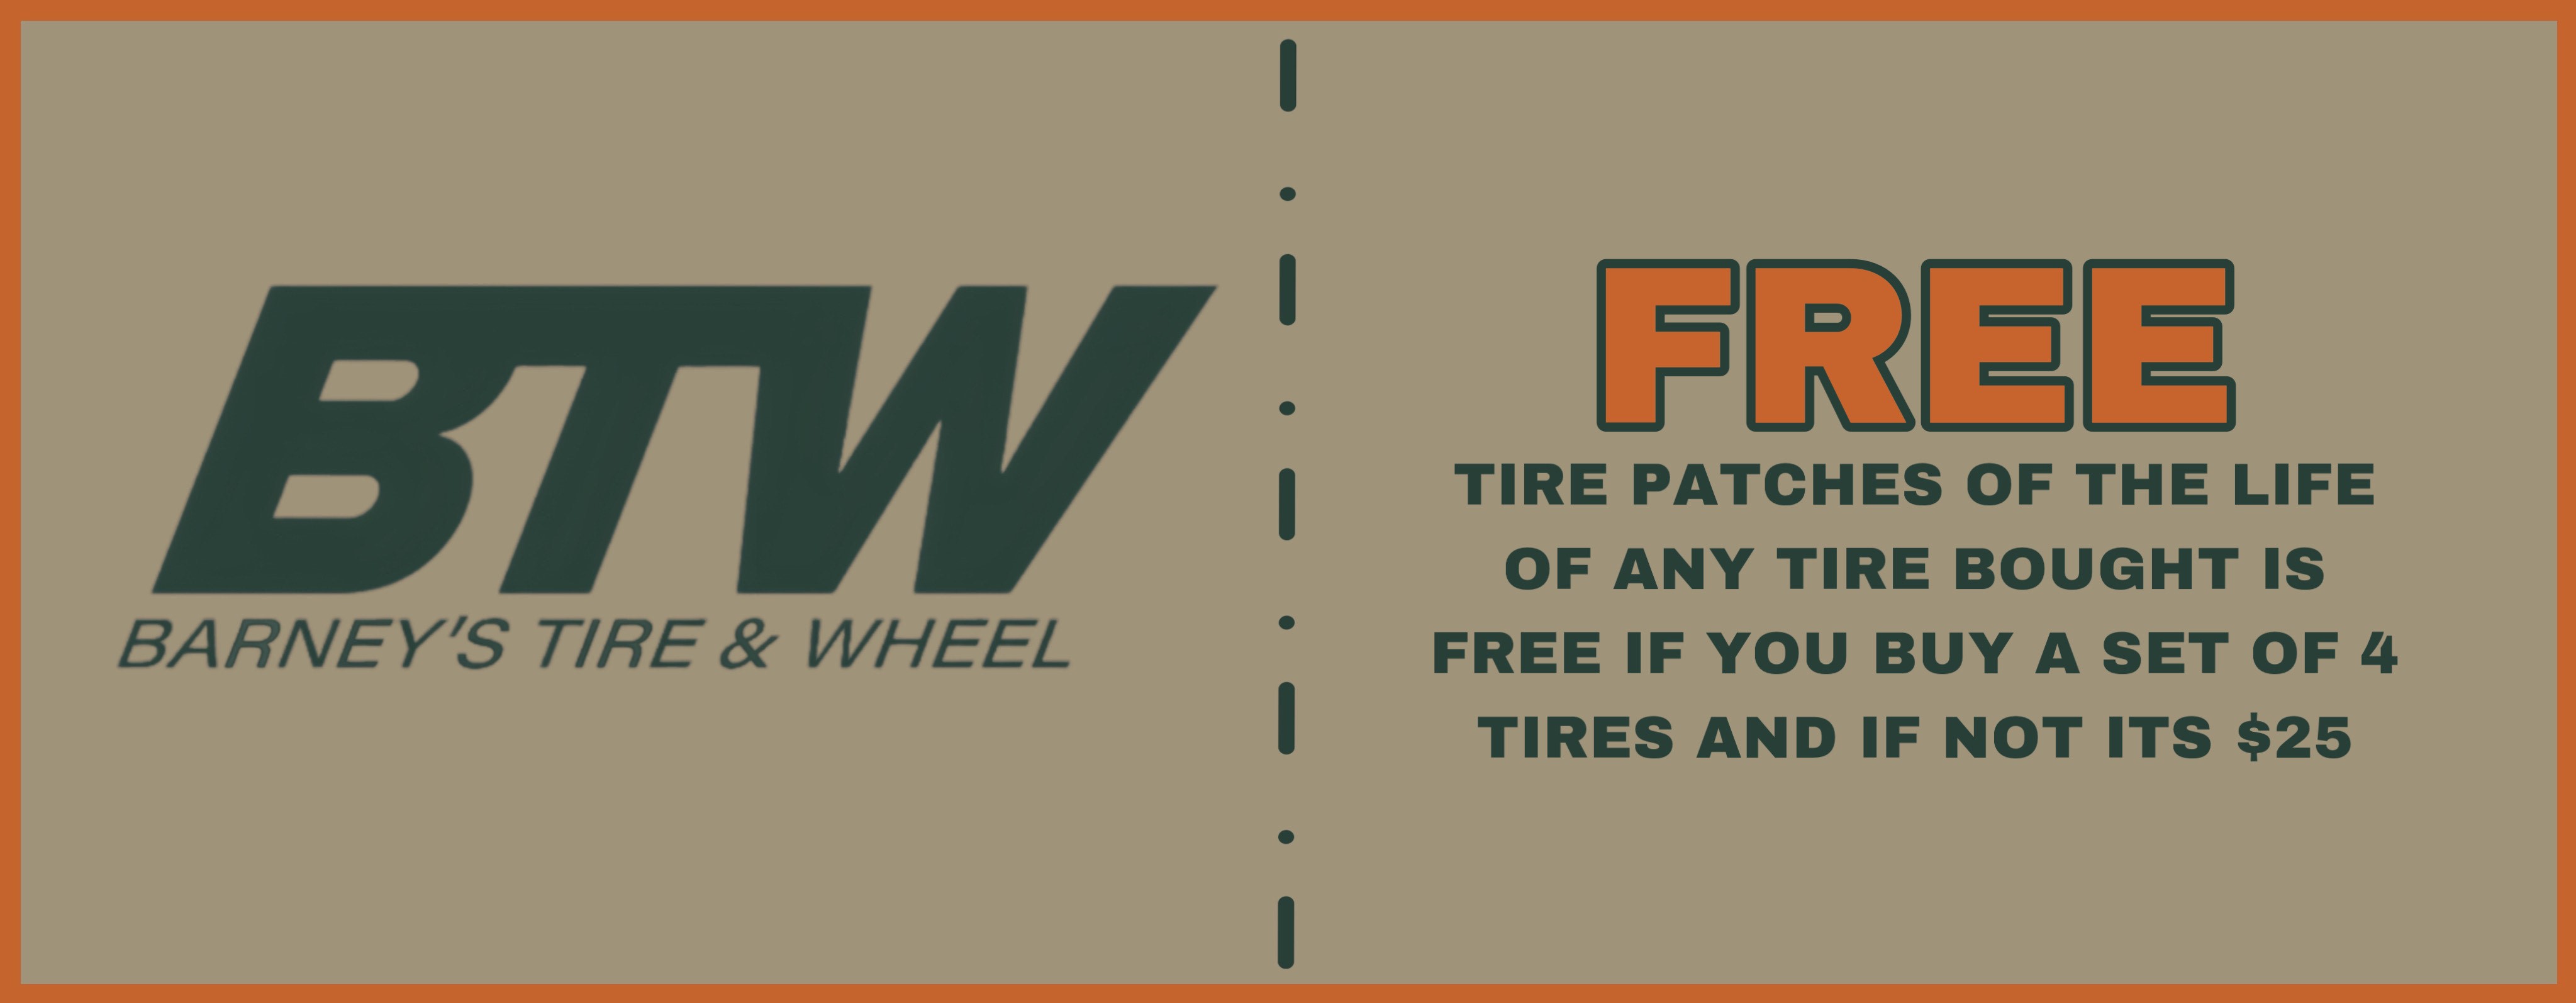 Free Tire Patch Special